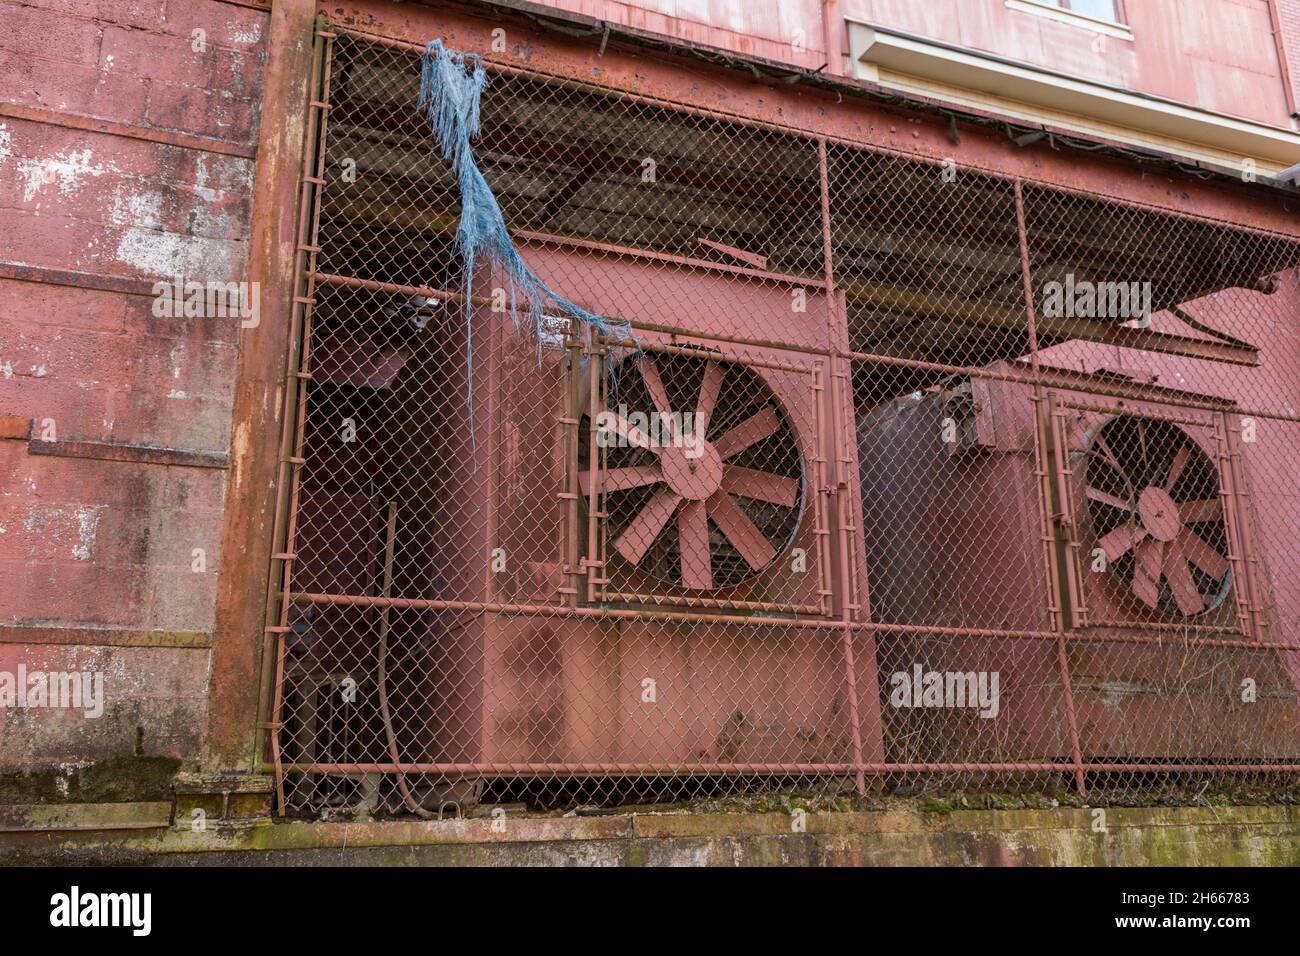 Old Industrial Building with large fans and chain link fence Stock Photo